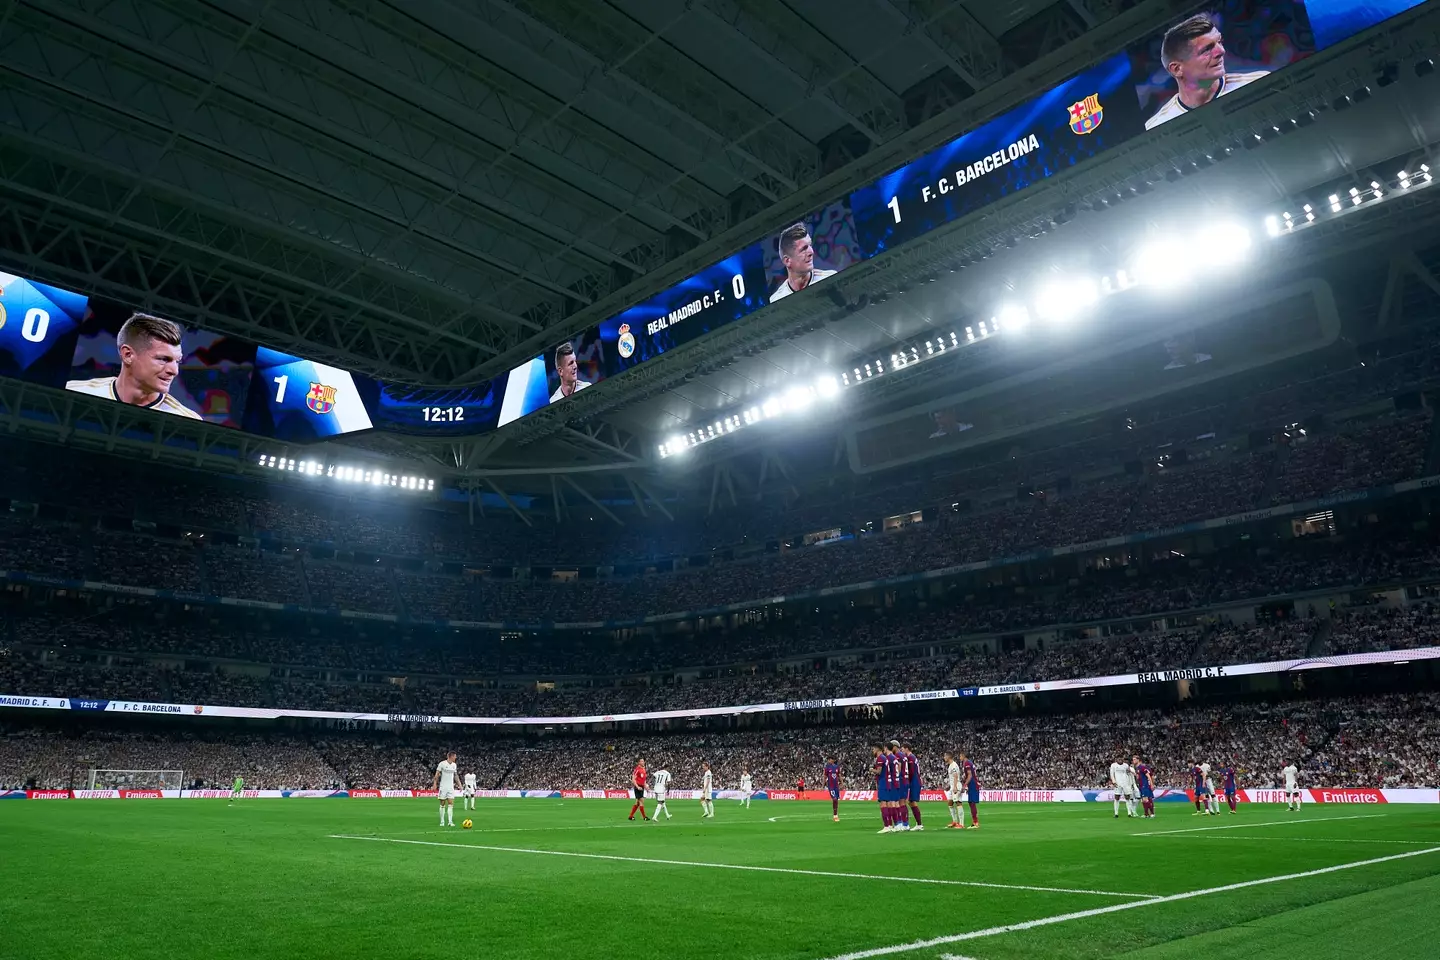 Real Madrid will close the Bernabeu roof when they face Bayern Munich.